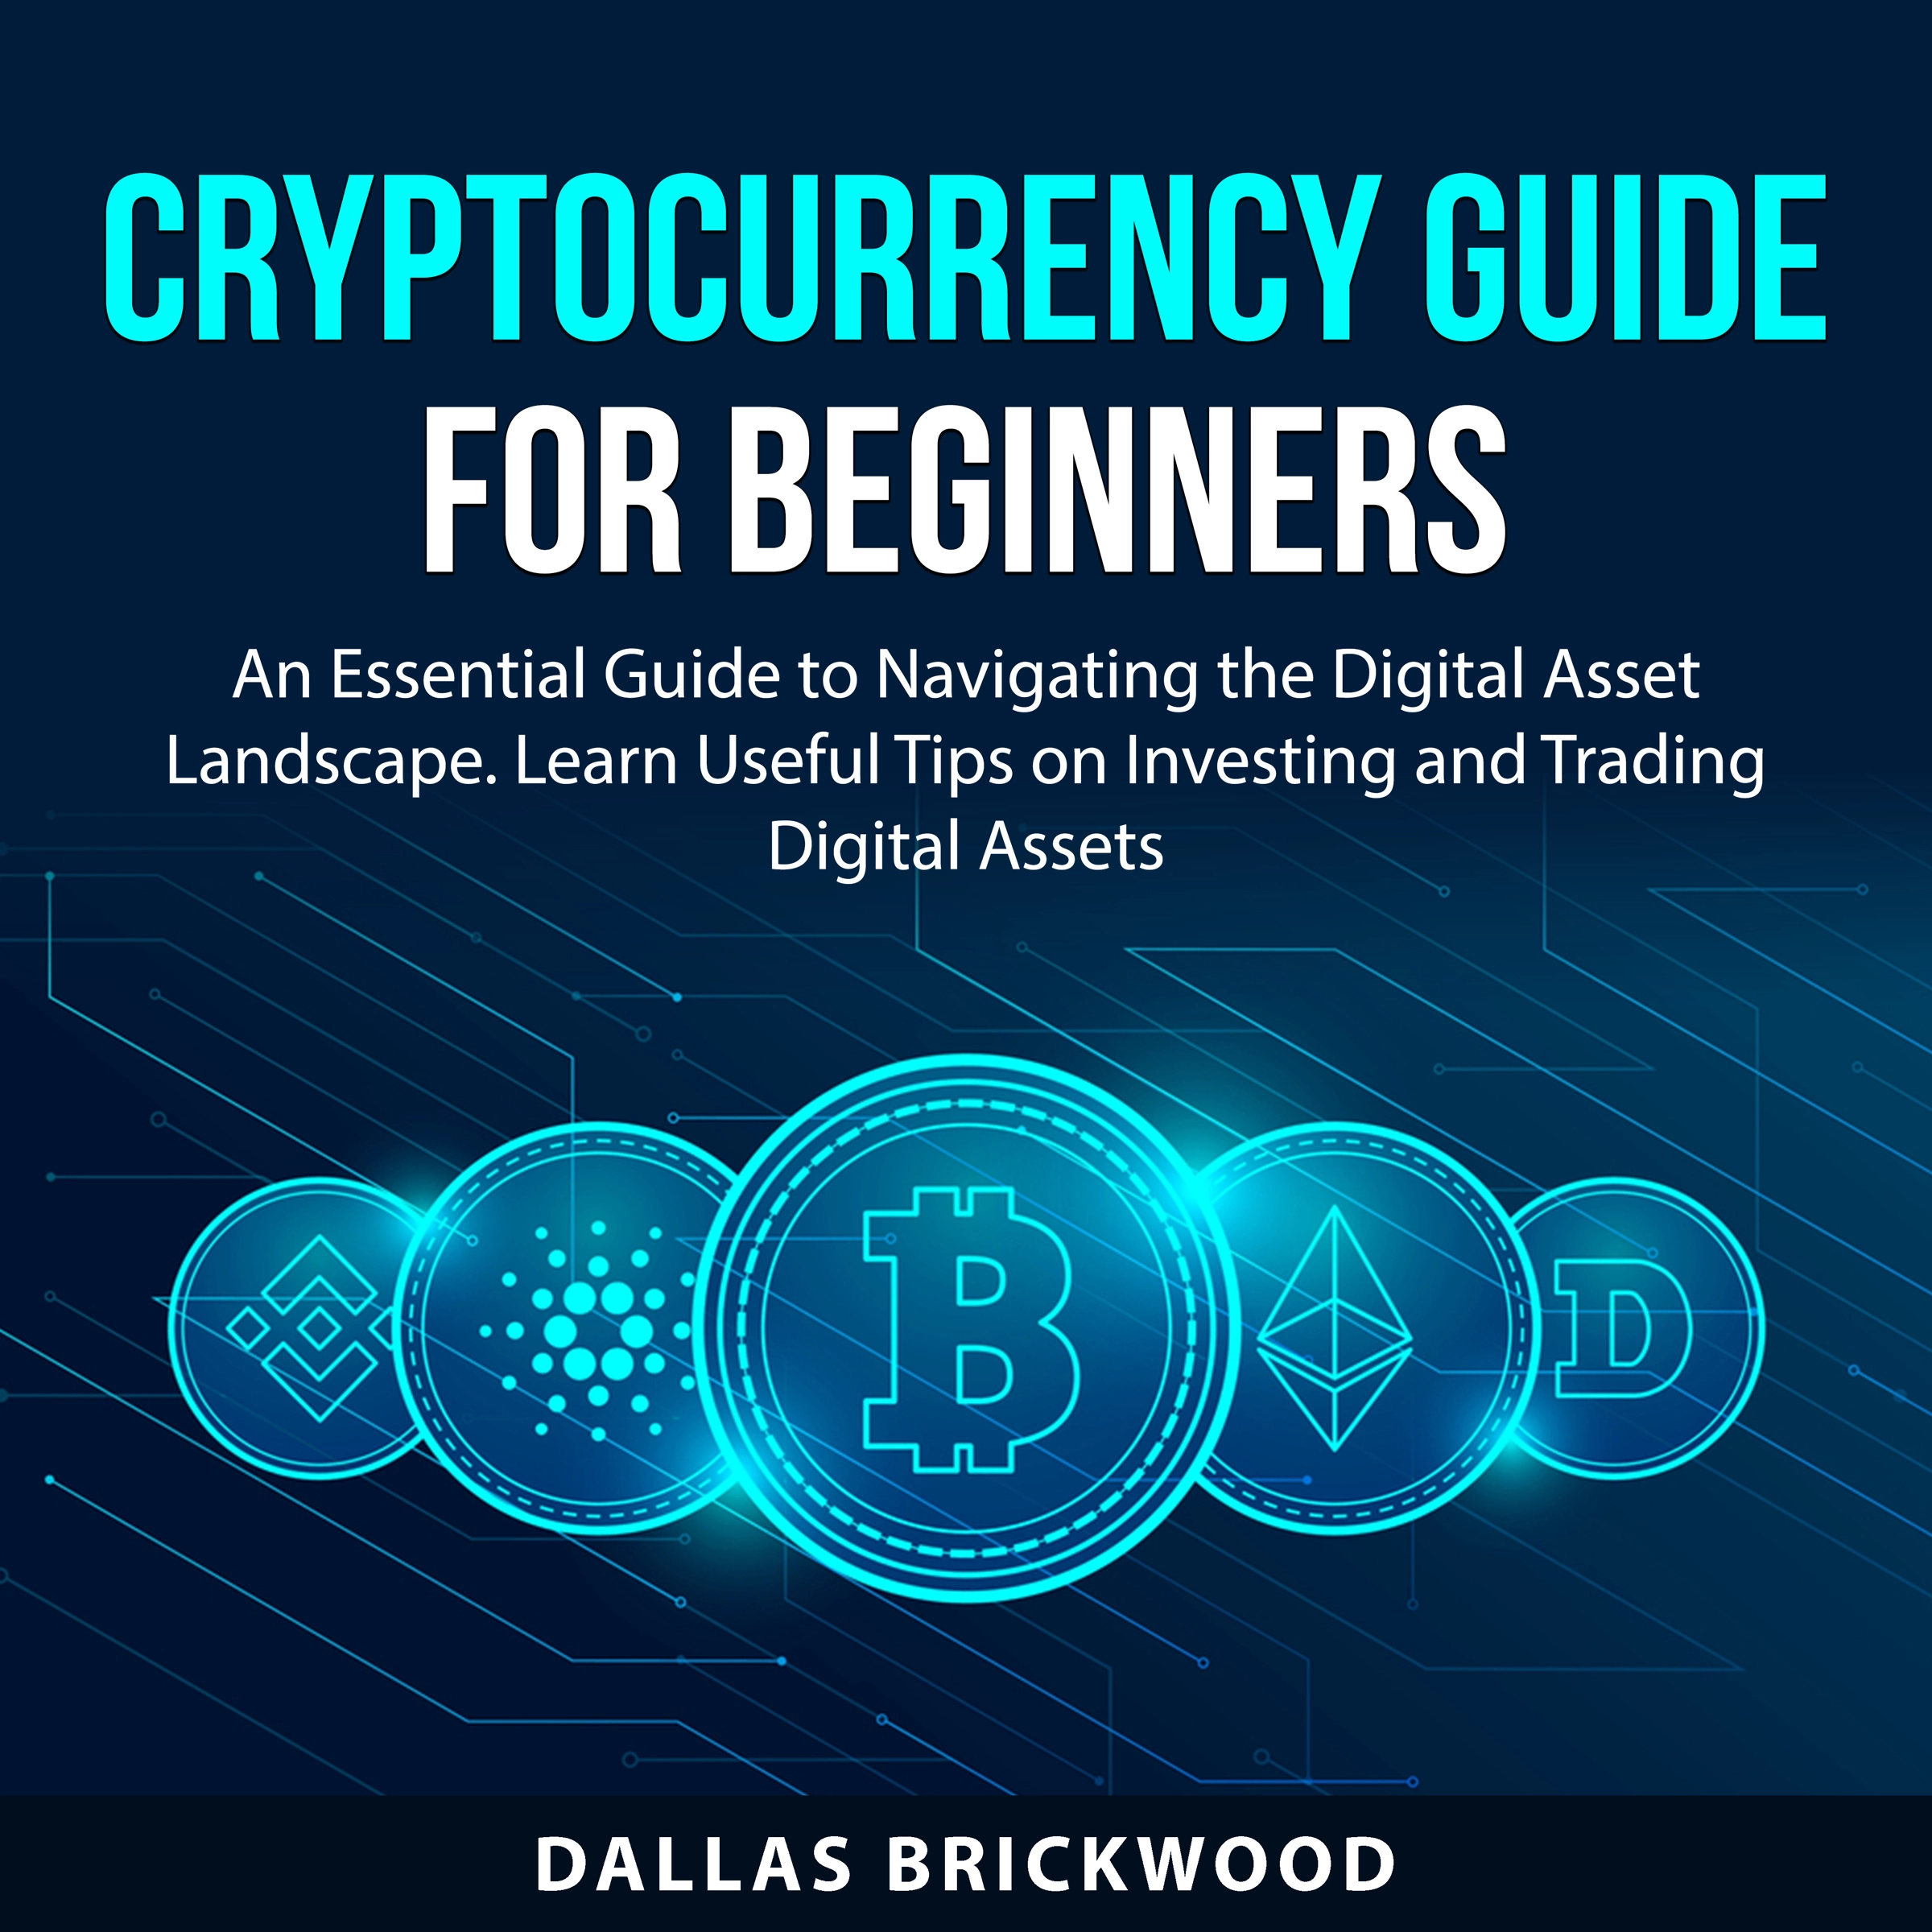 Cryptocurrency Guide for Beginners Audiobook by Dallas Brickwood